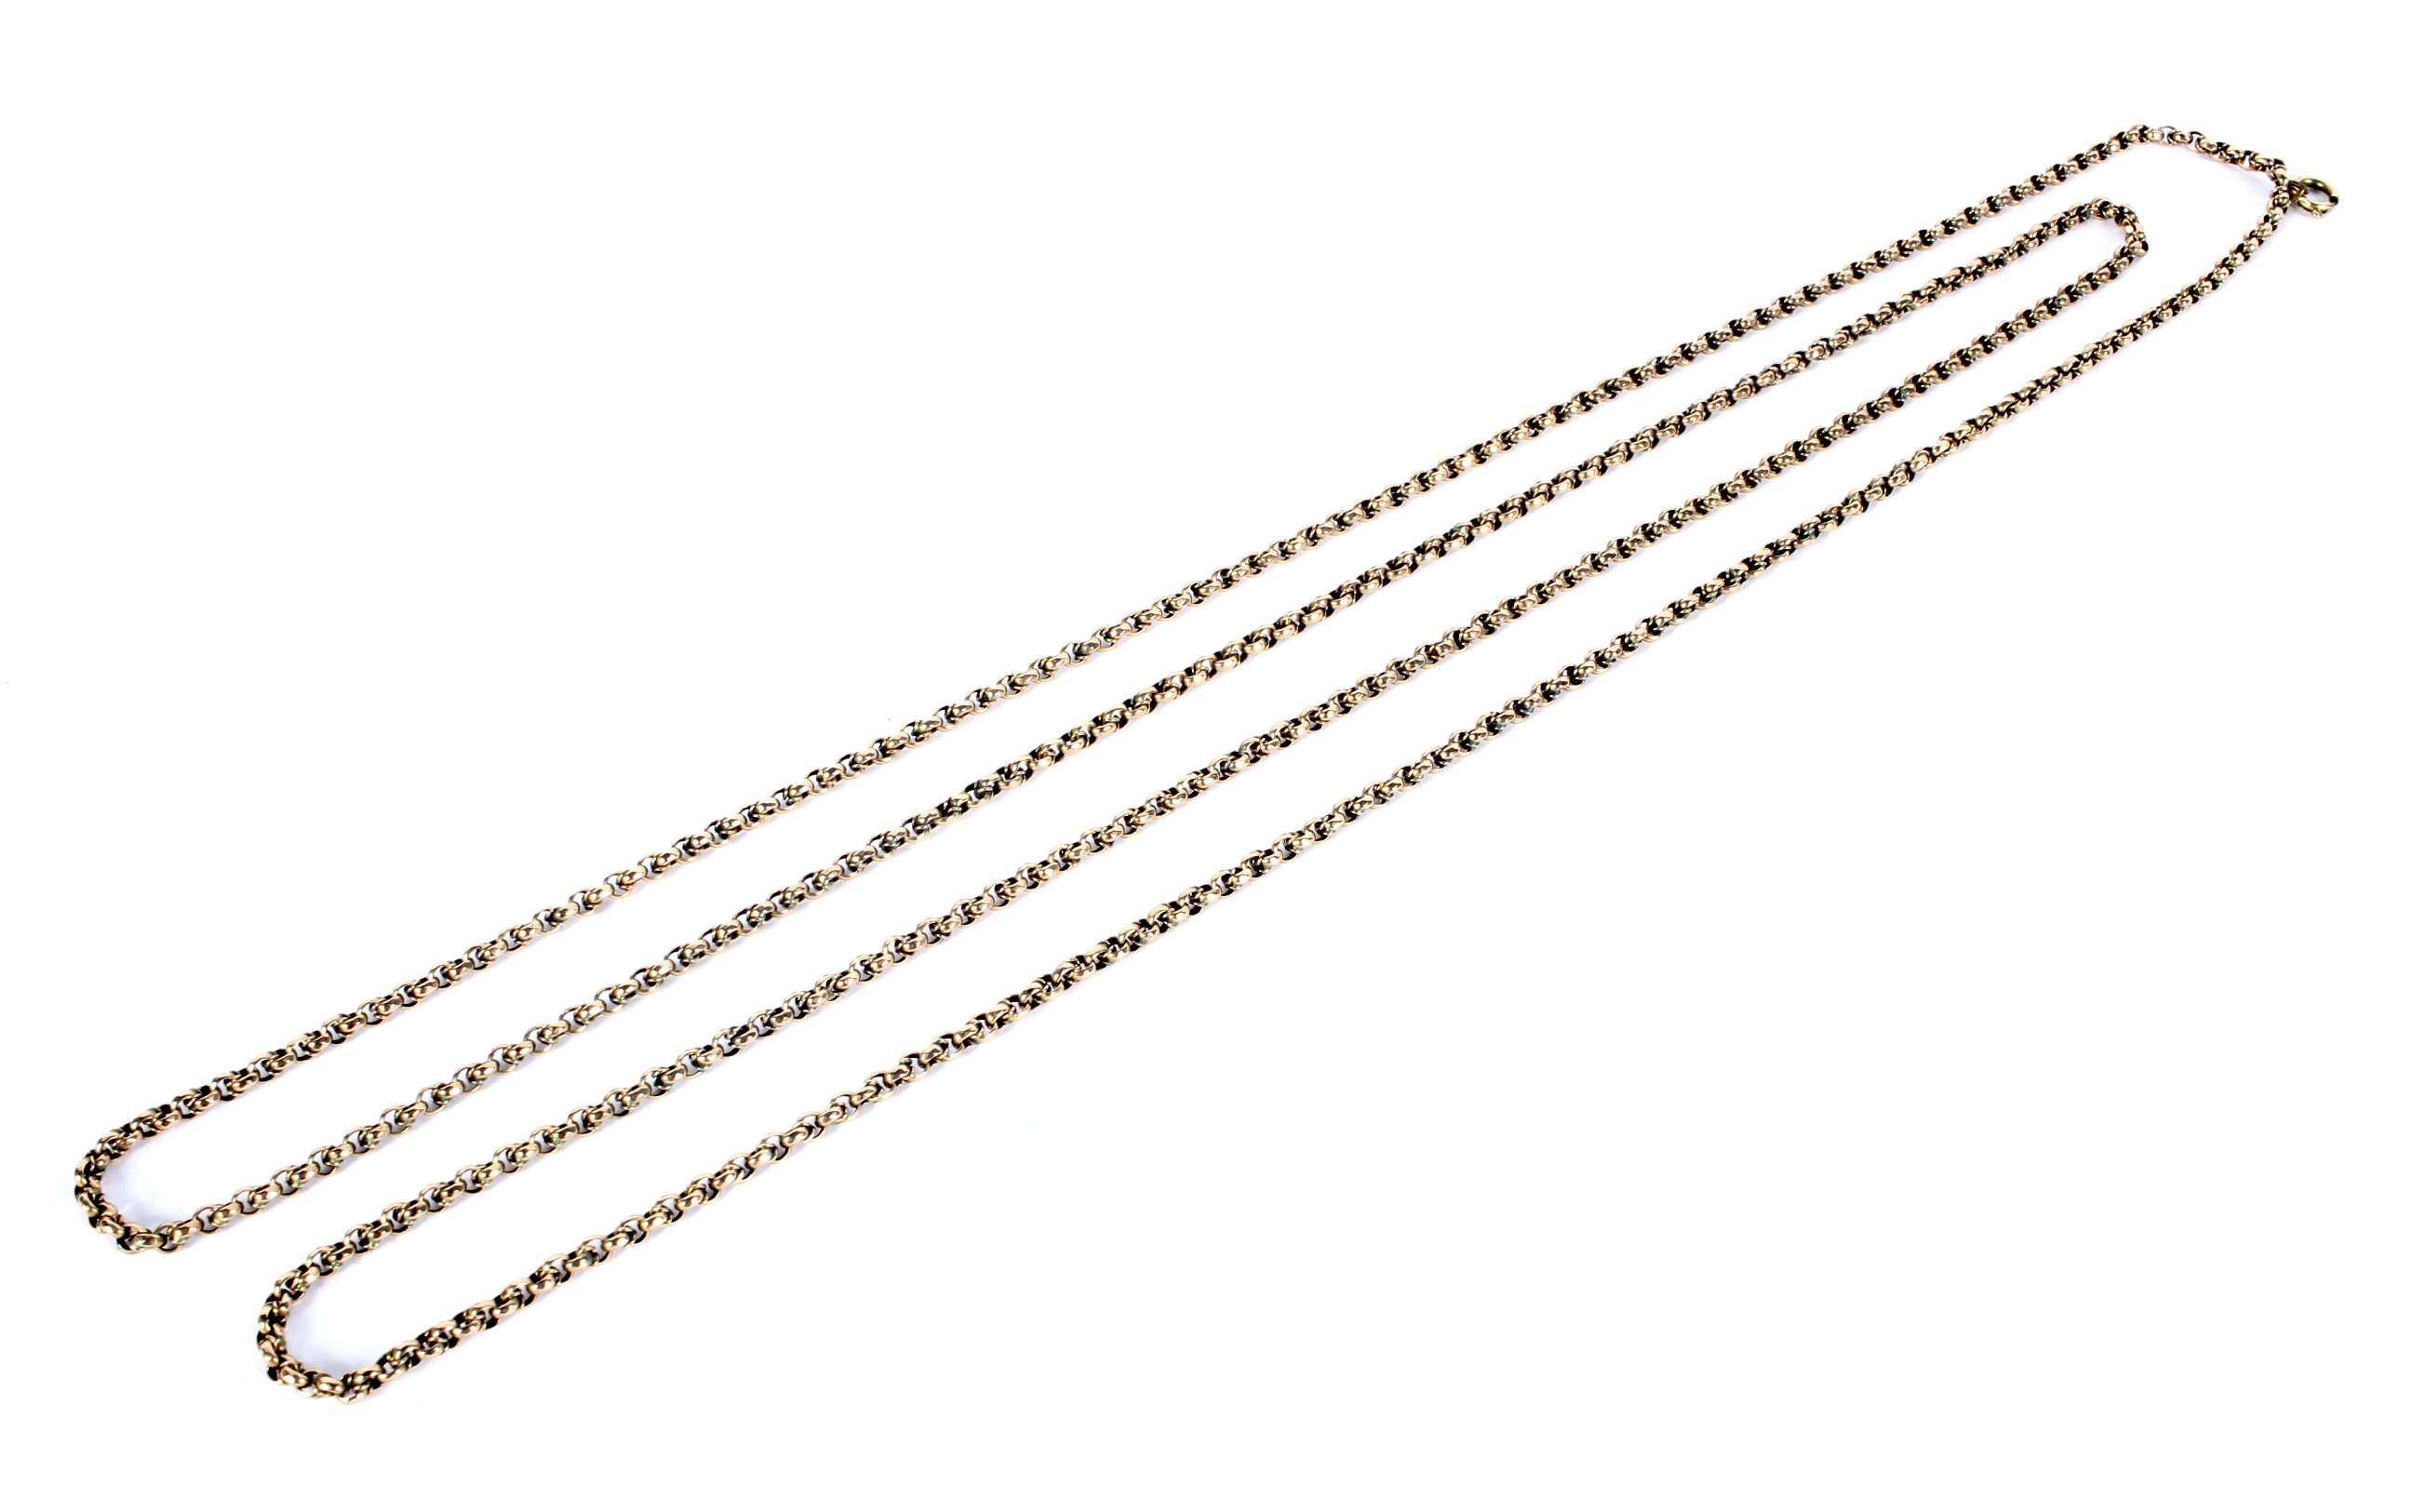 A 19th century gold fancy faceted belcher link necklace adapted from a guard chain.